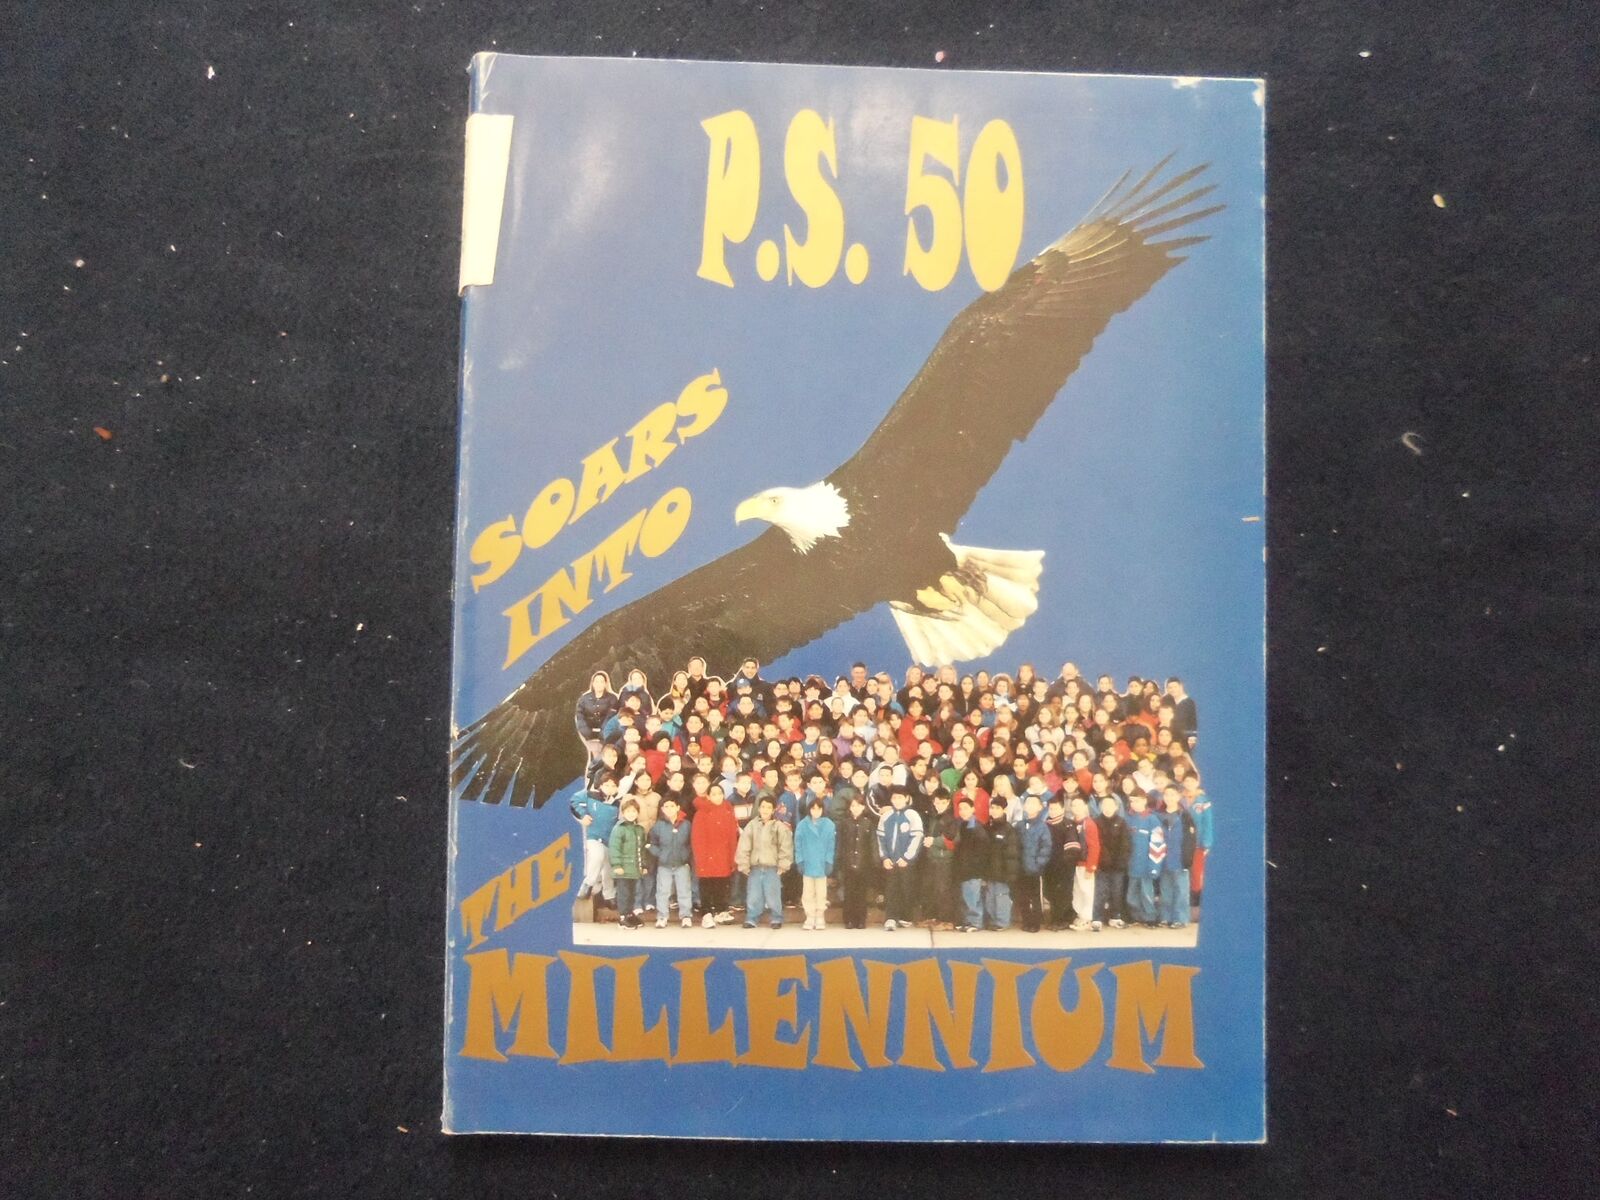 2000 P.S. 50 YEARBOOK - SOARS INTO THE MILLENIUM - STATEN ISLAND, NY - YB 3043